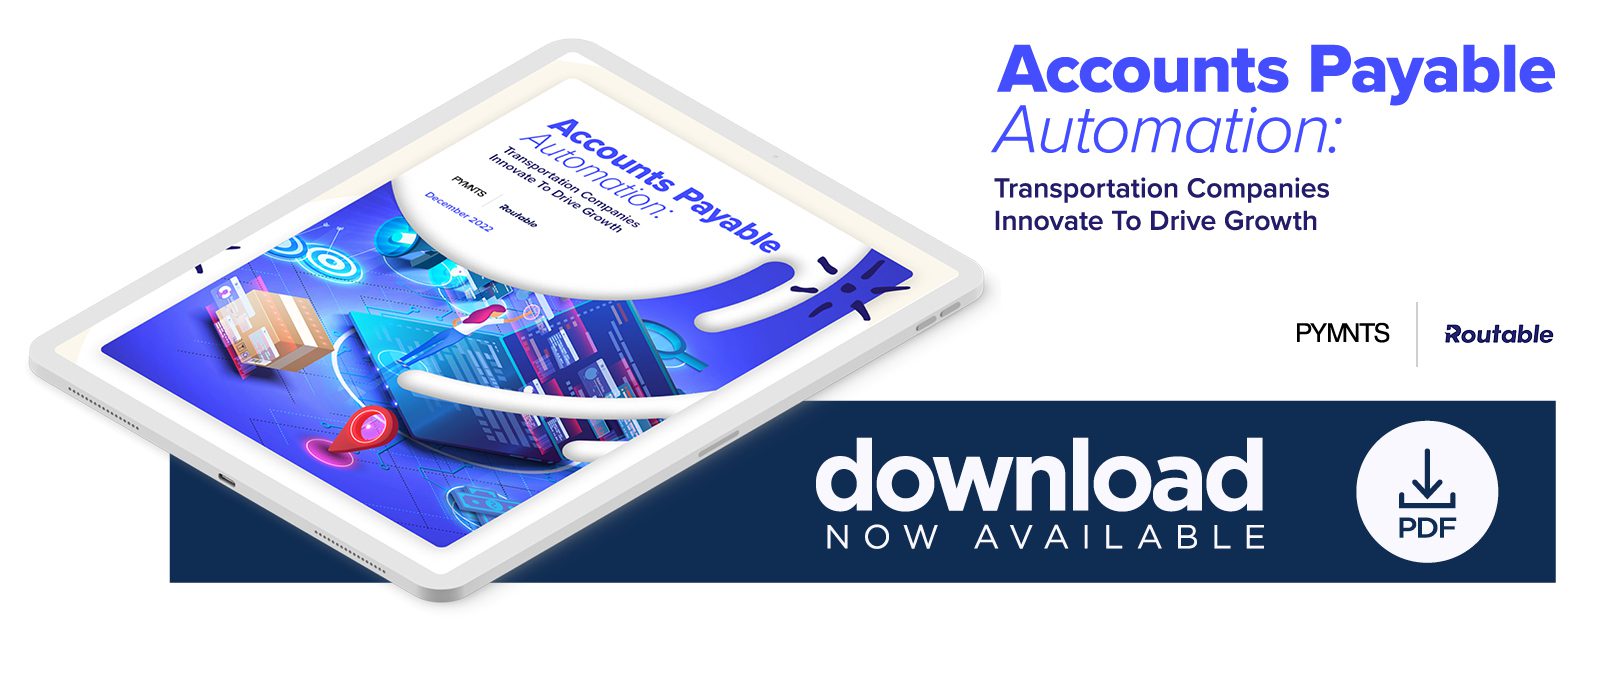 Routable - Accounts Payable Automation: Transportation Companies Innovate To Drive Growth - December 2022 - Explore how executives from transportation, shipping and logistics companies plan to automate payables platforms and how automation can aid in long-term growth